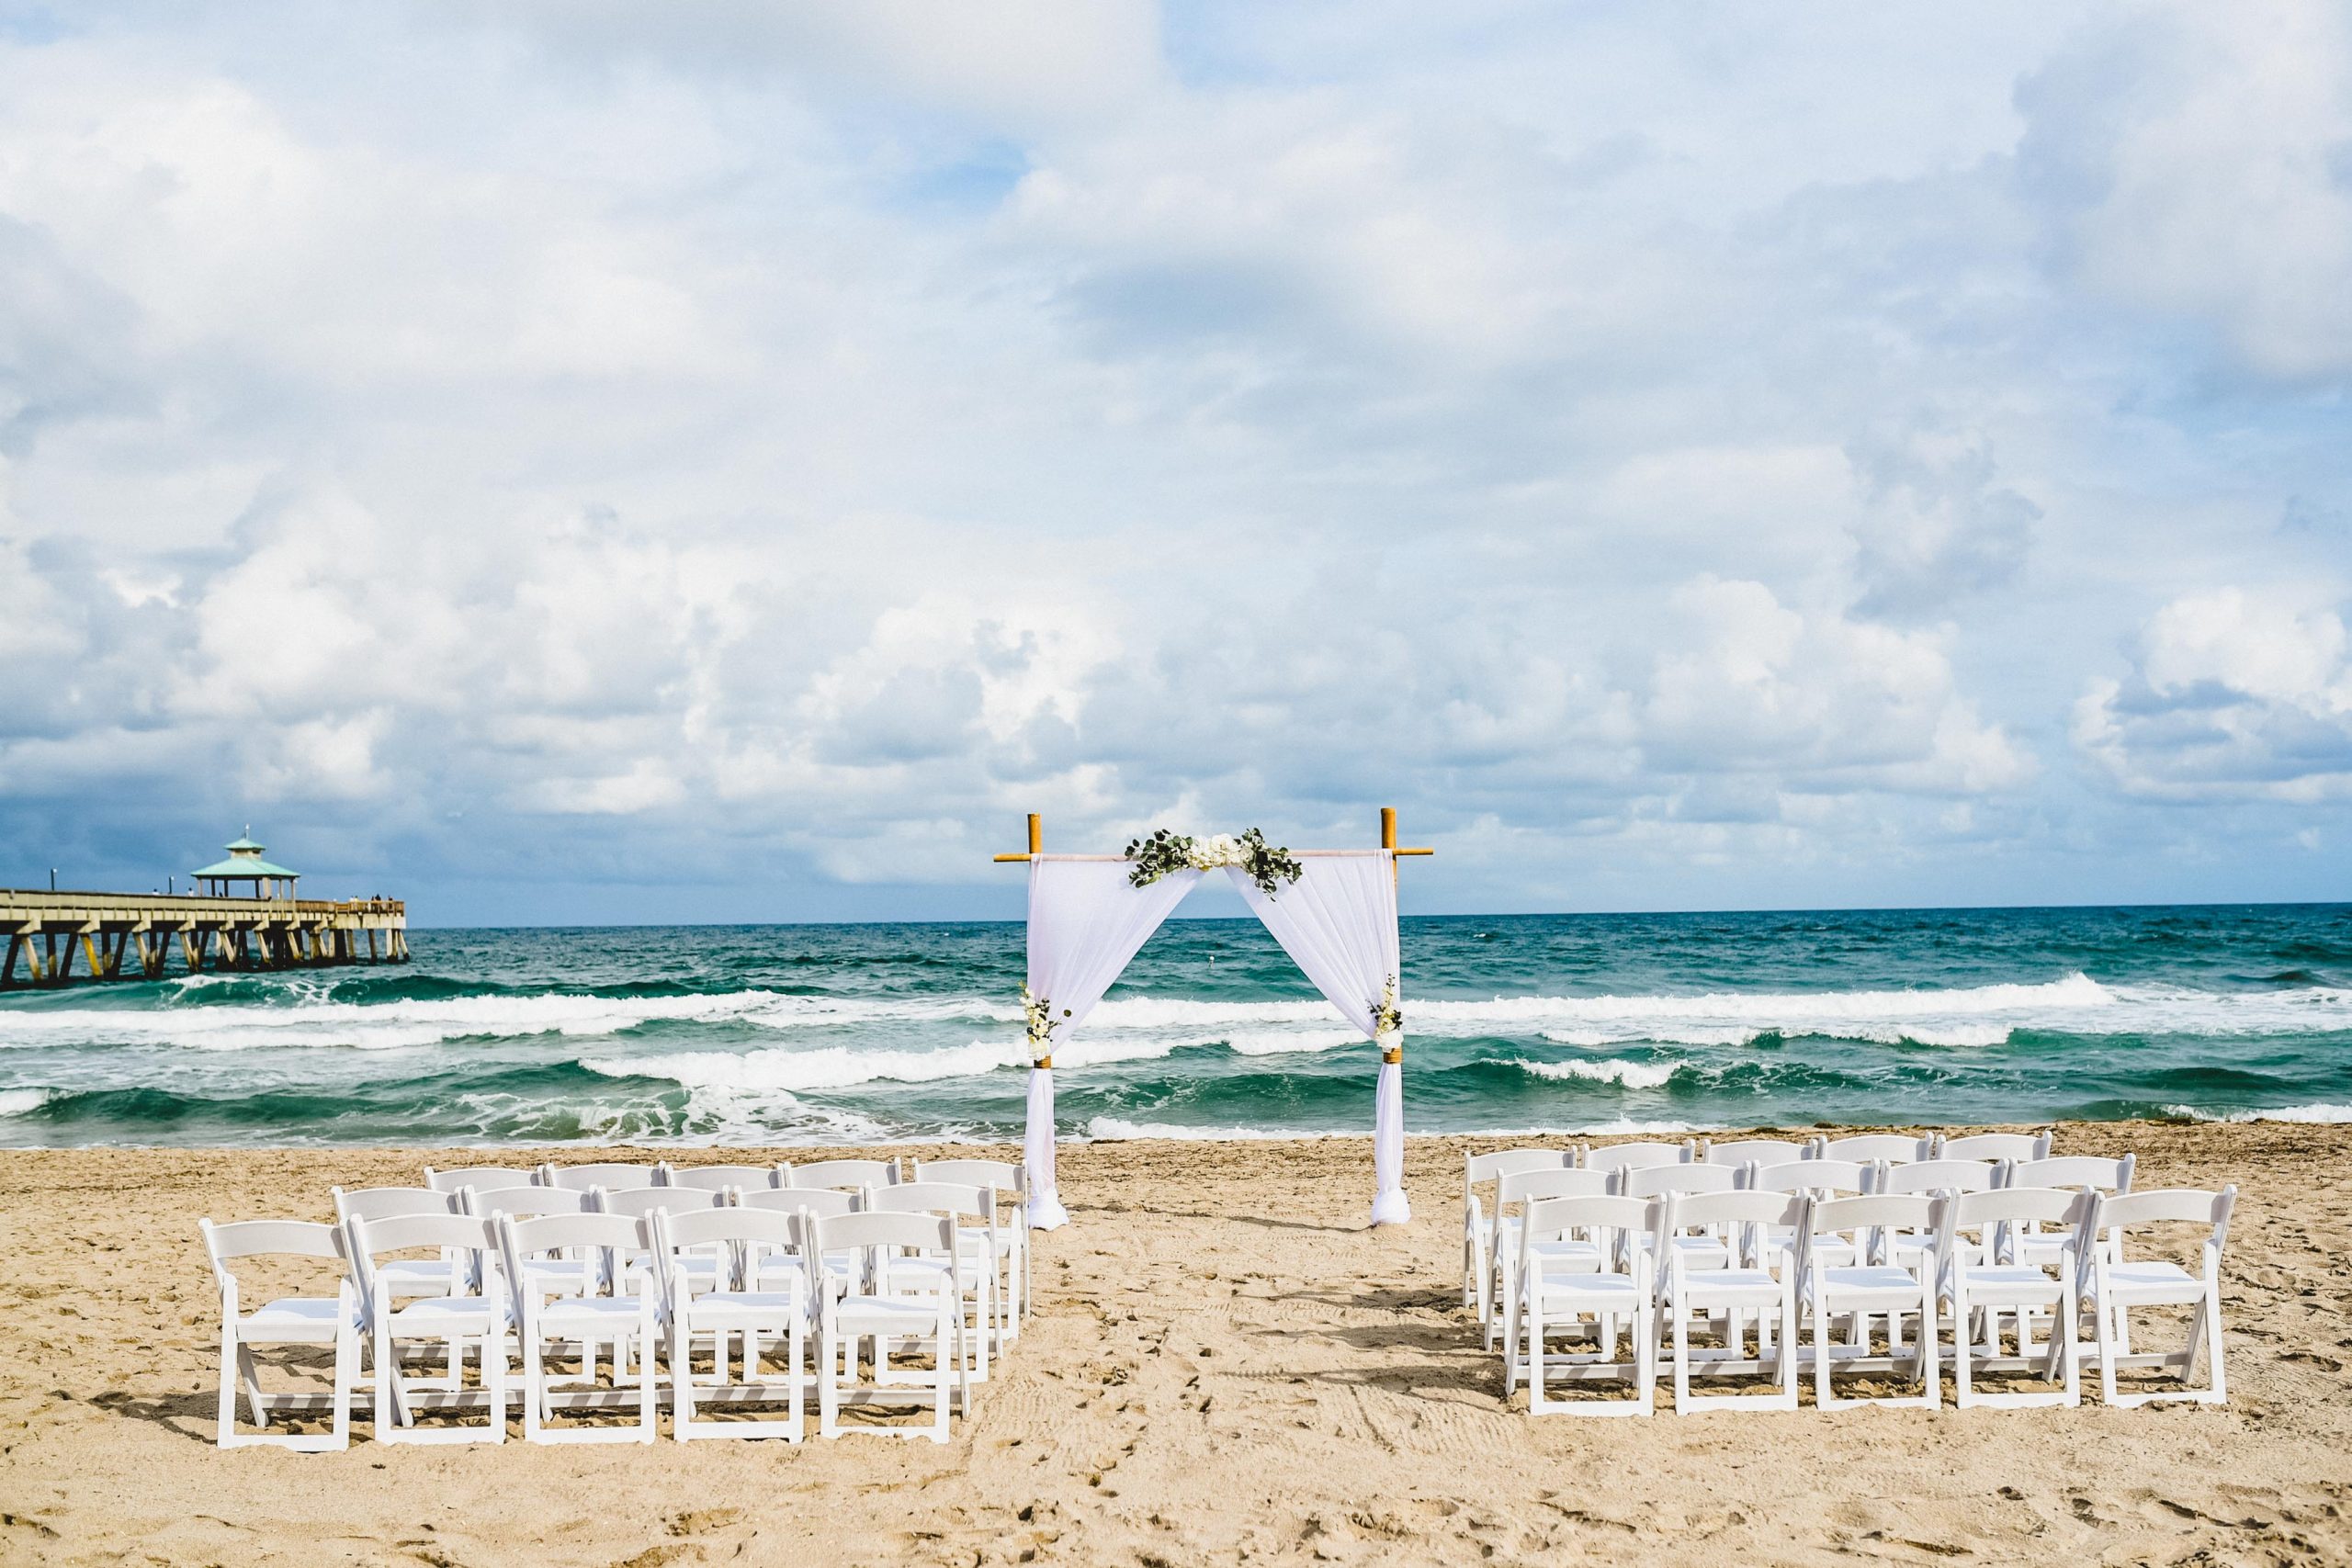 Check out our blog featuring some of the most amazing beach locations that serve as great wedding venues all across the US!